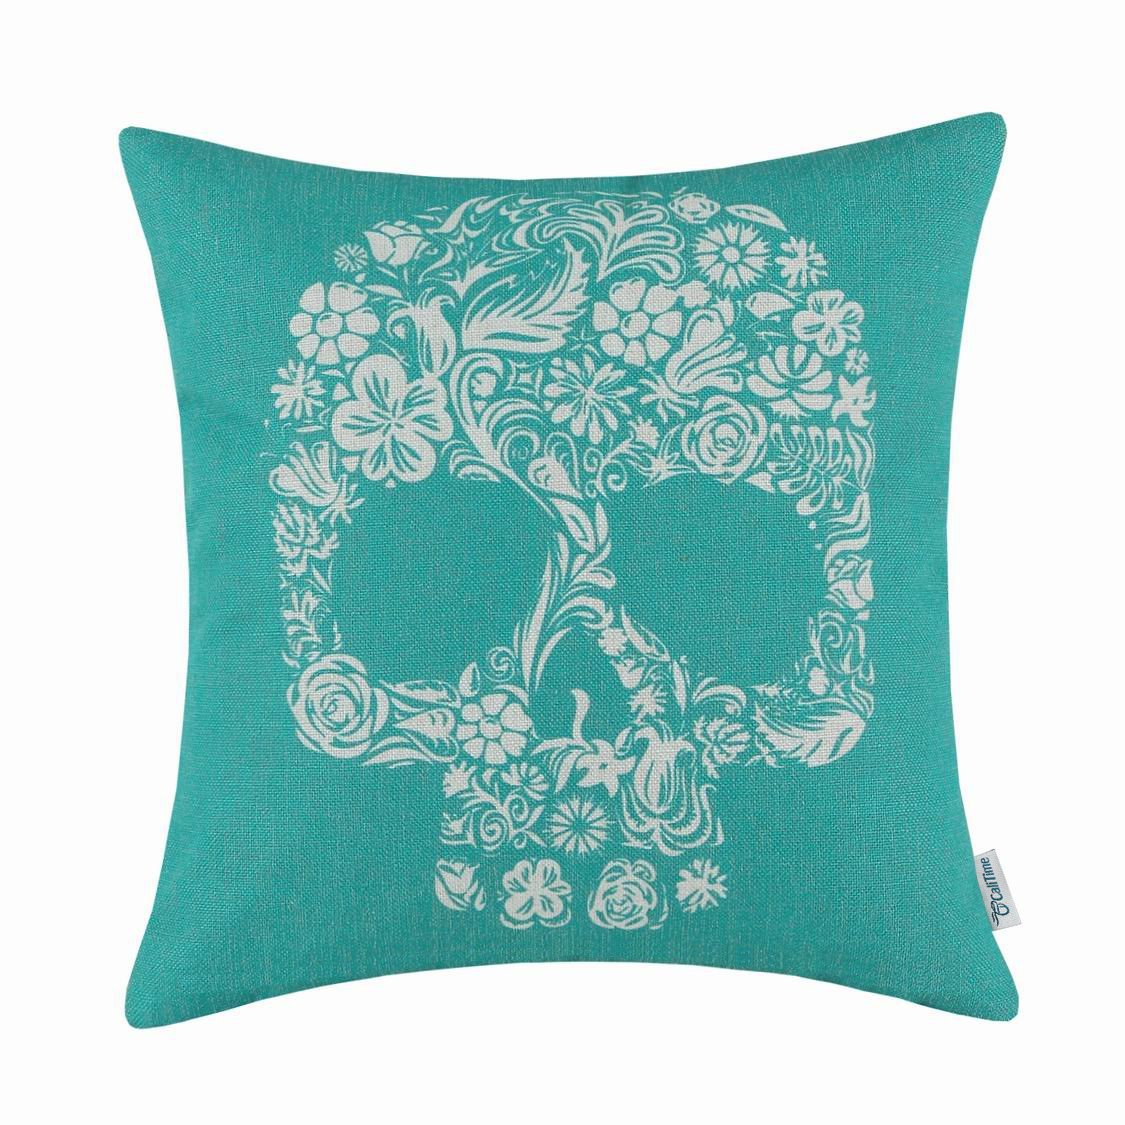 CaliTime Cushion Cover Throw Pillow Shell Halloween Floral Skull 18 X 18 Inches Teal